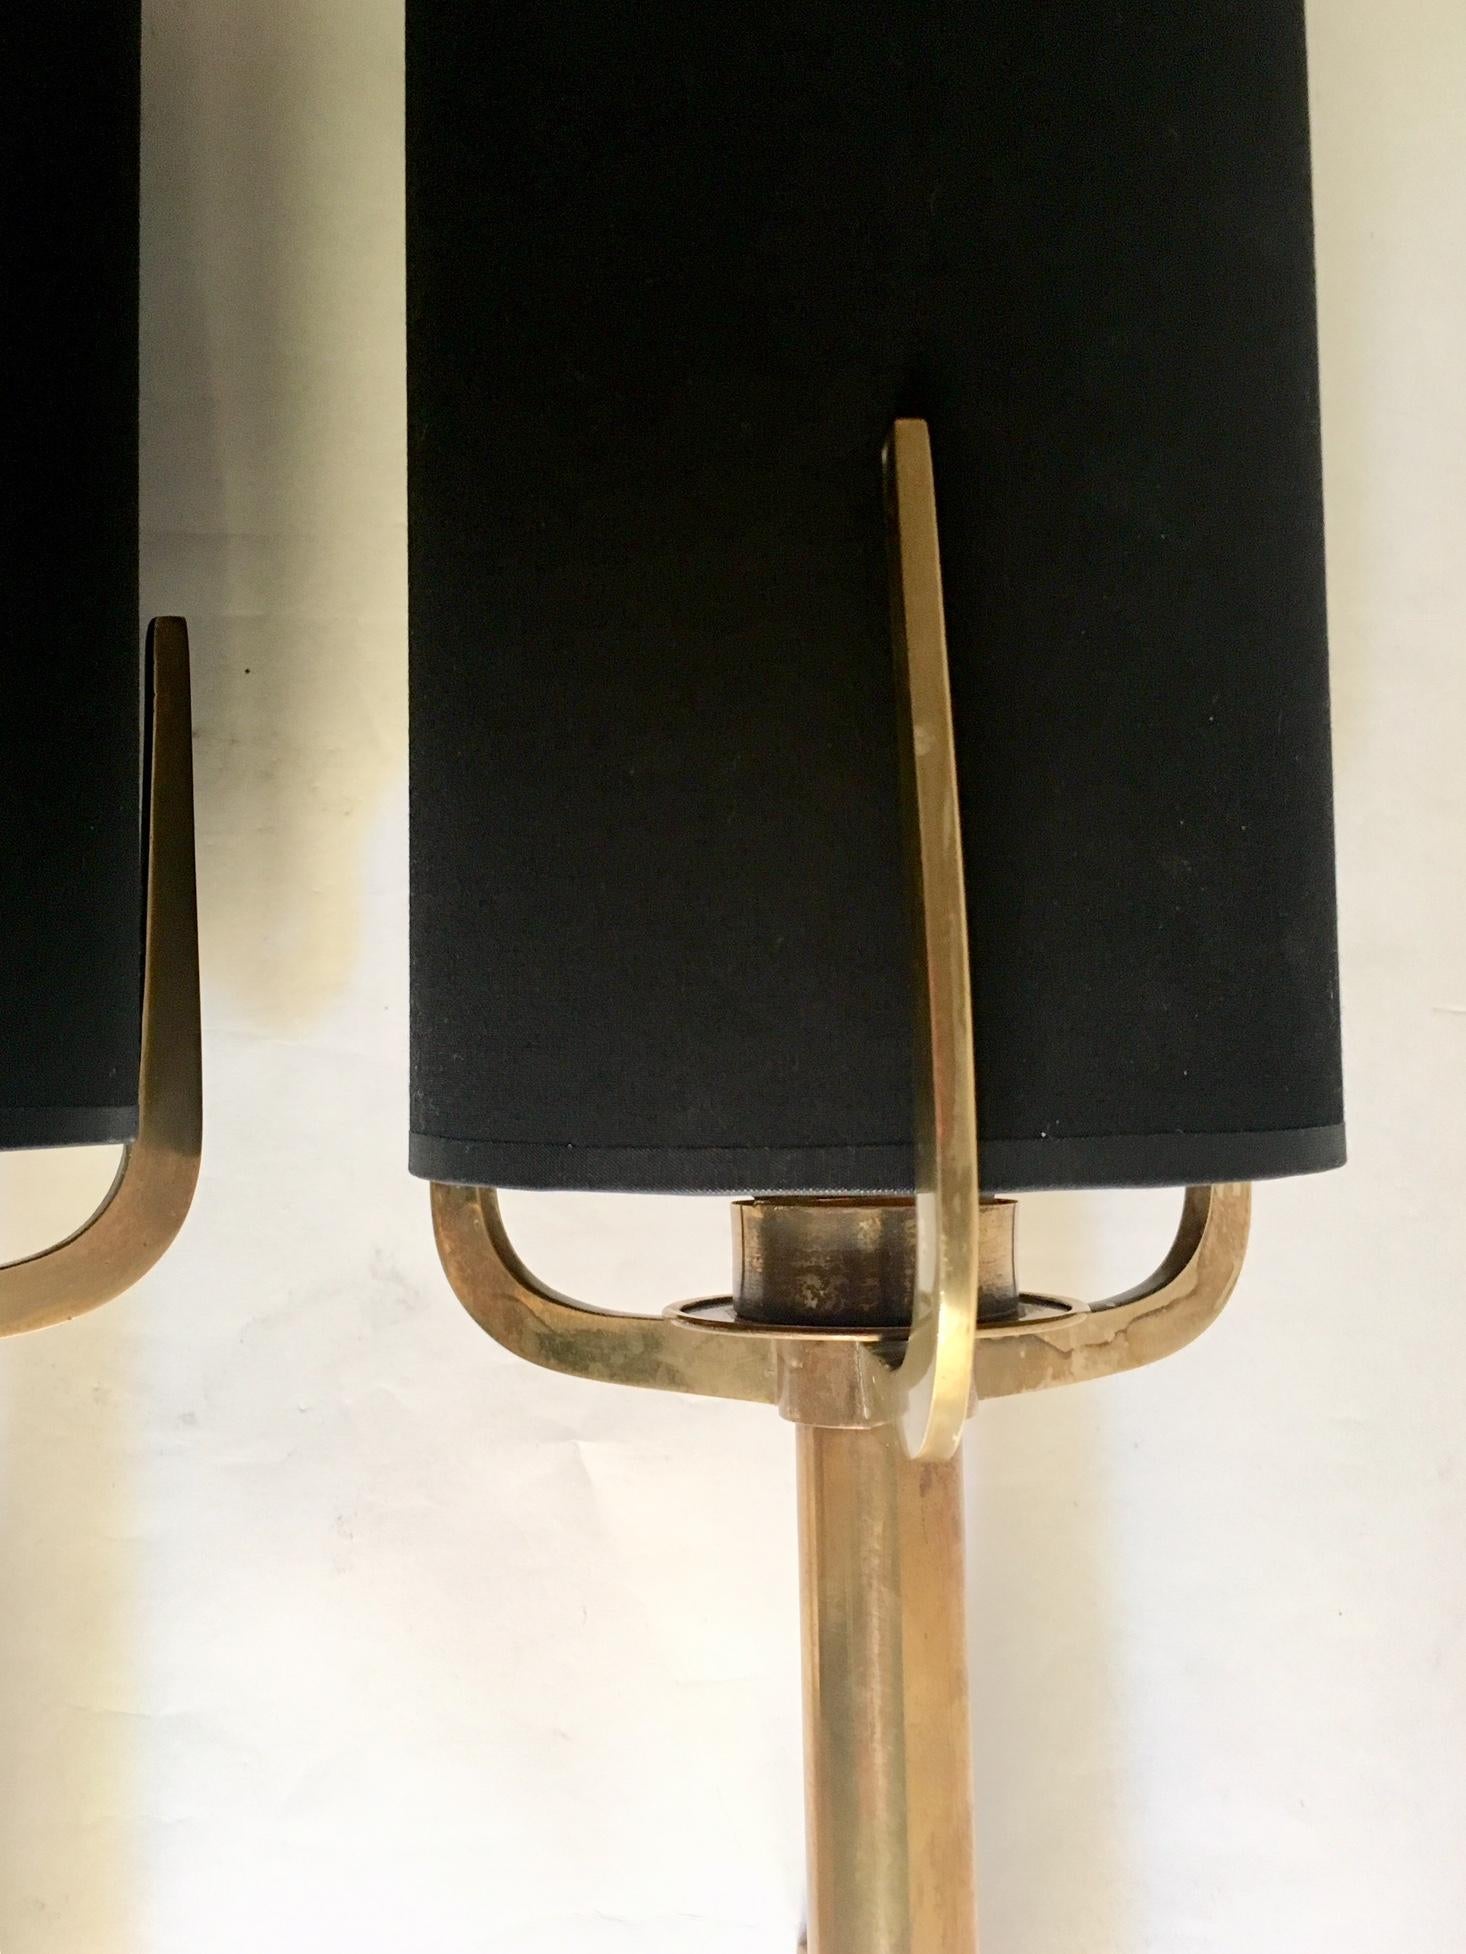 Pair of large Spanish wall sconces, manufactured in brass, ending in three peaks, the shades are new, black with golden interior.